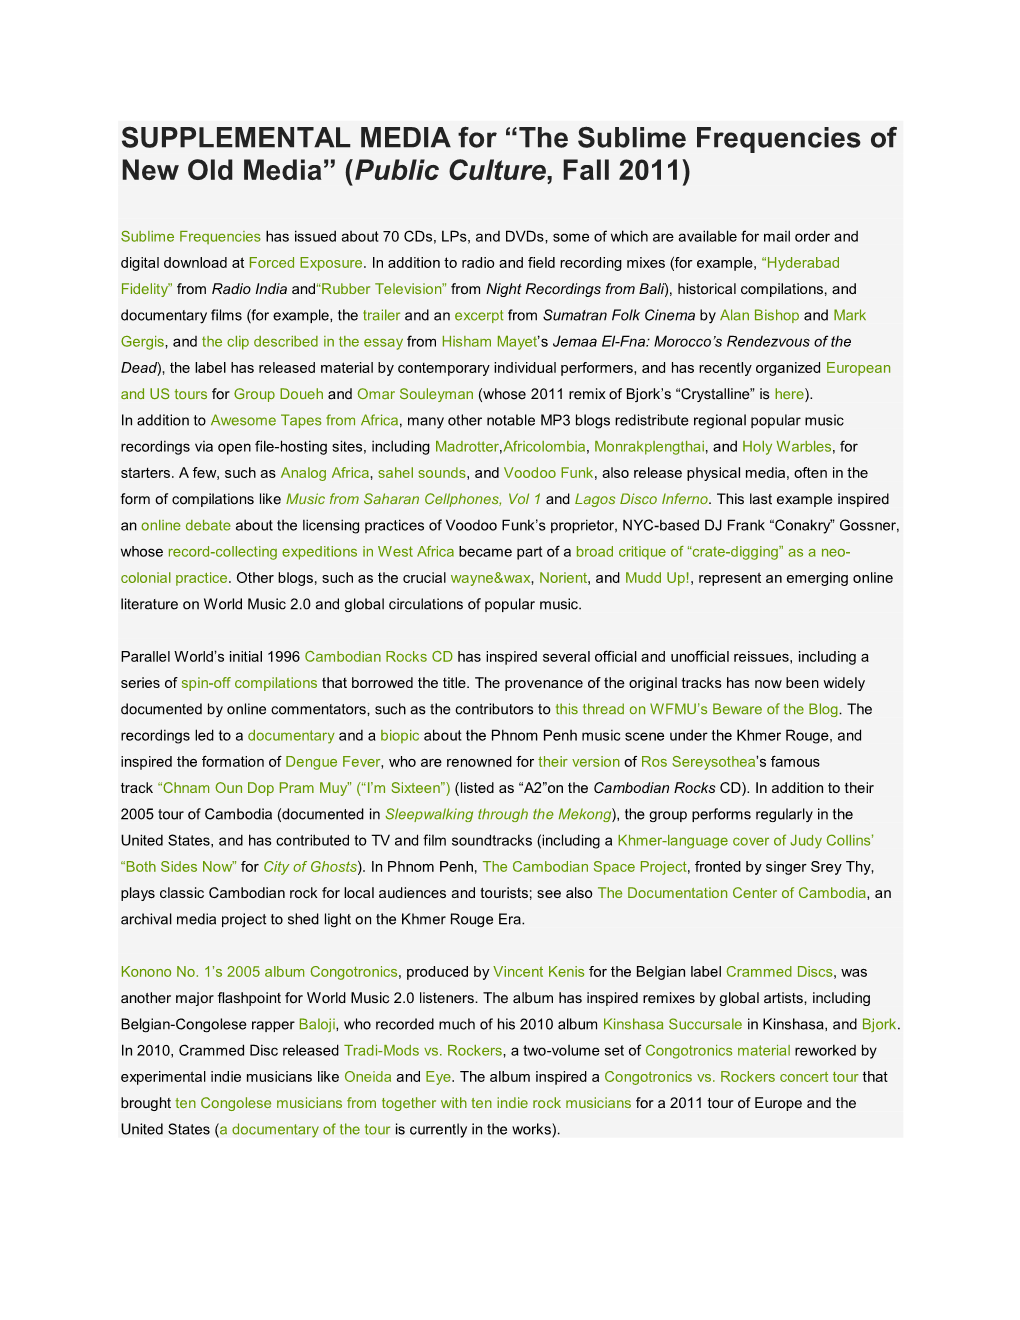 SUPPLEMENTAL MEDIA for “The Sublime Frequencies of New Old Media” (Public Culture, Fall 2011)